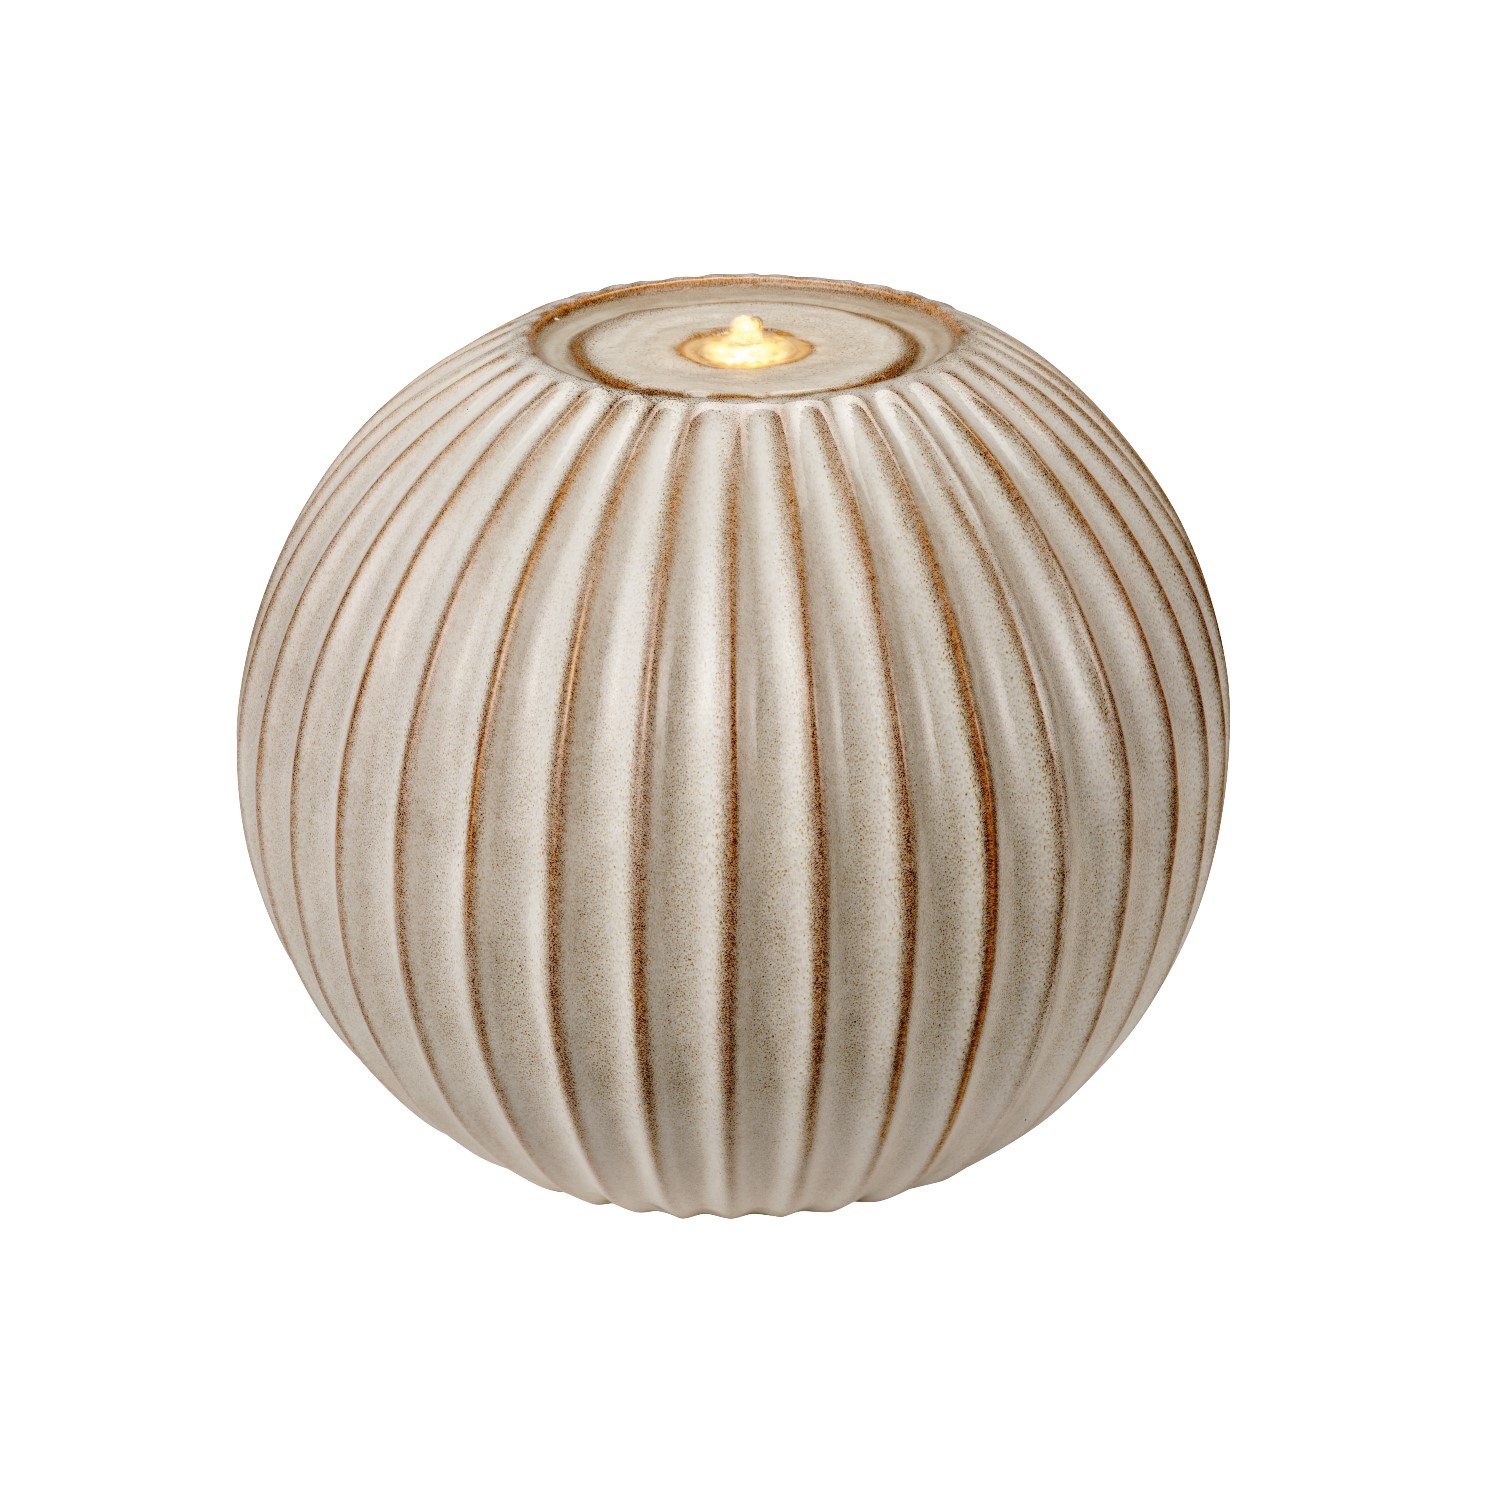 Read more about Glazed ceramic ball water feature with led lights